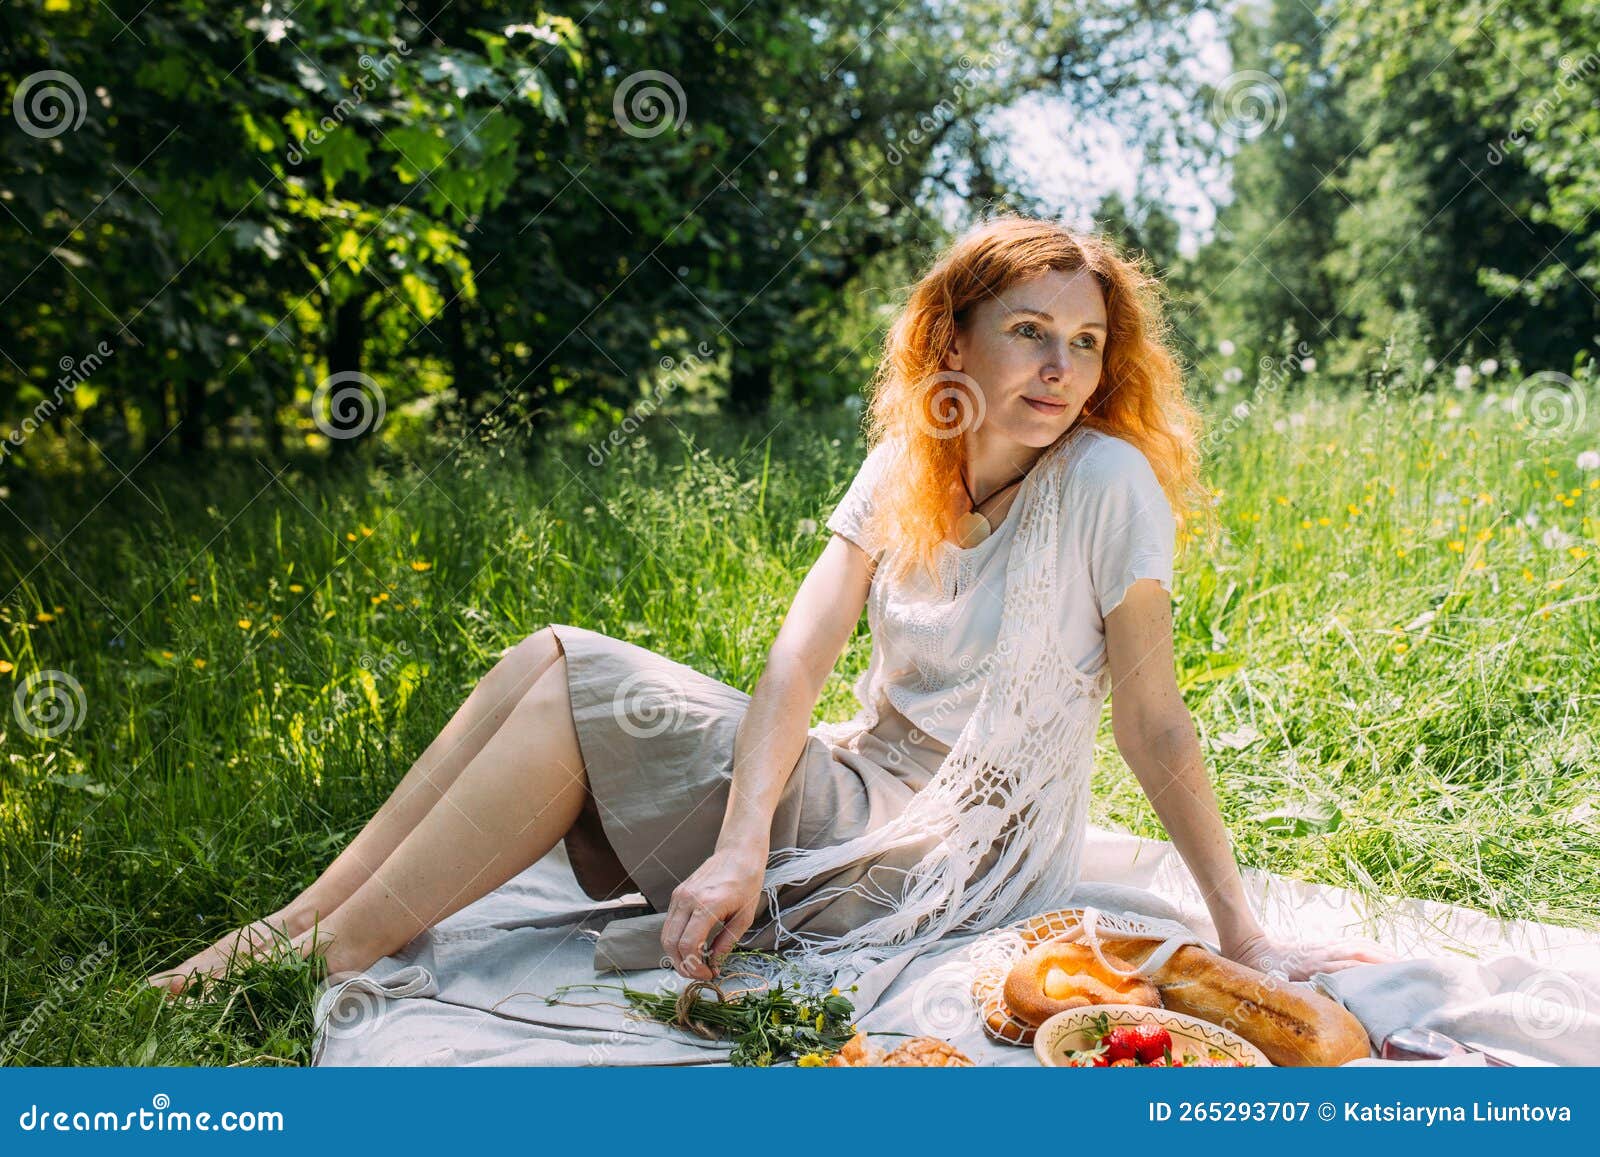 Beautiful Redhead Woman On Picnic She Smiles Eat Strawberrie And Enjoys Summer Stock Image